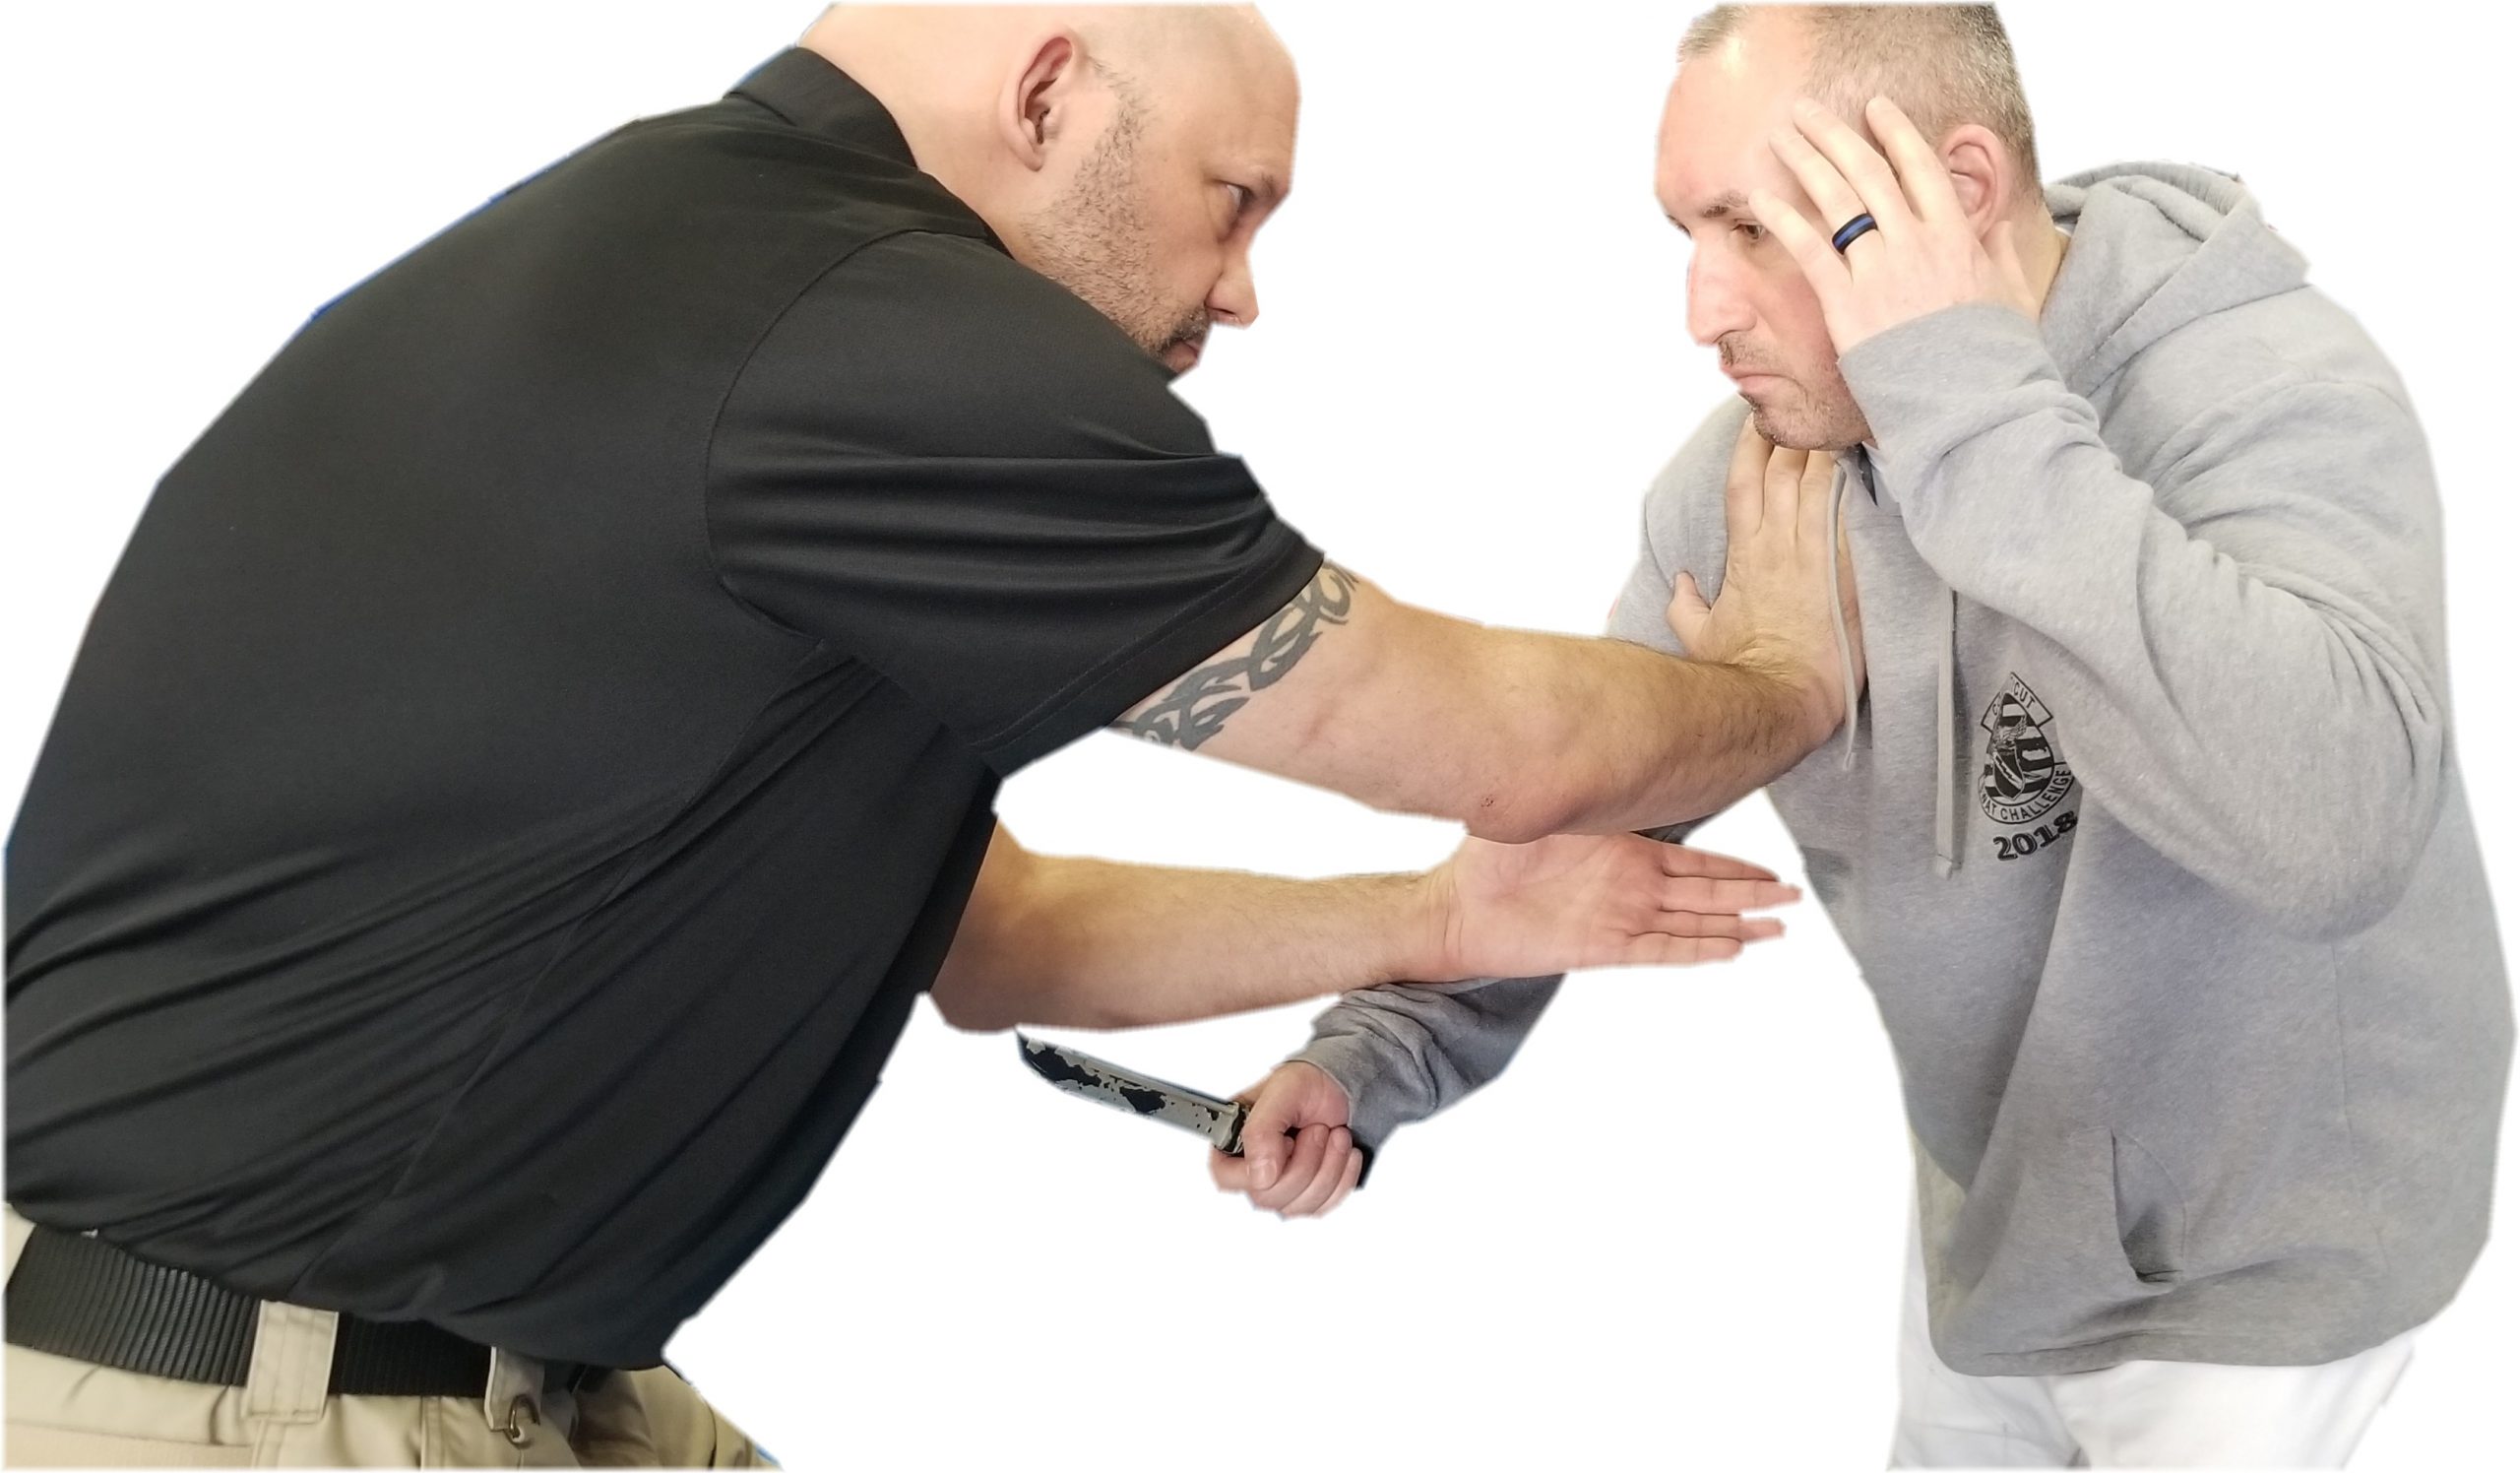 MN – Ground Control And Edged Weapon Instructor